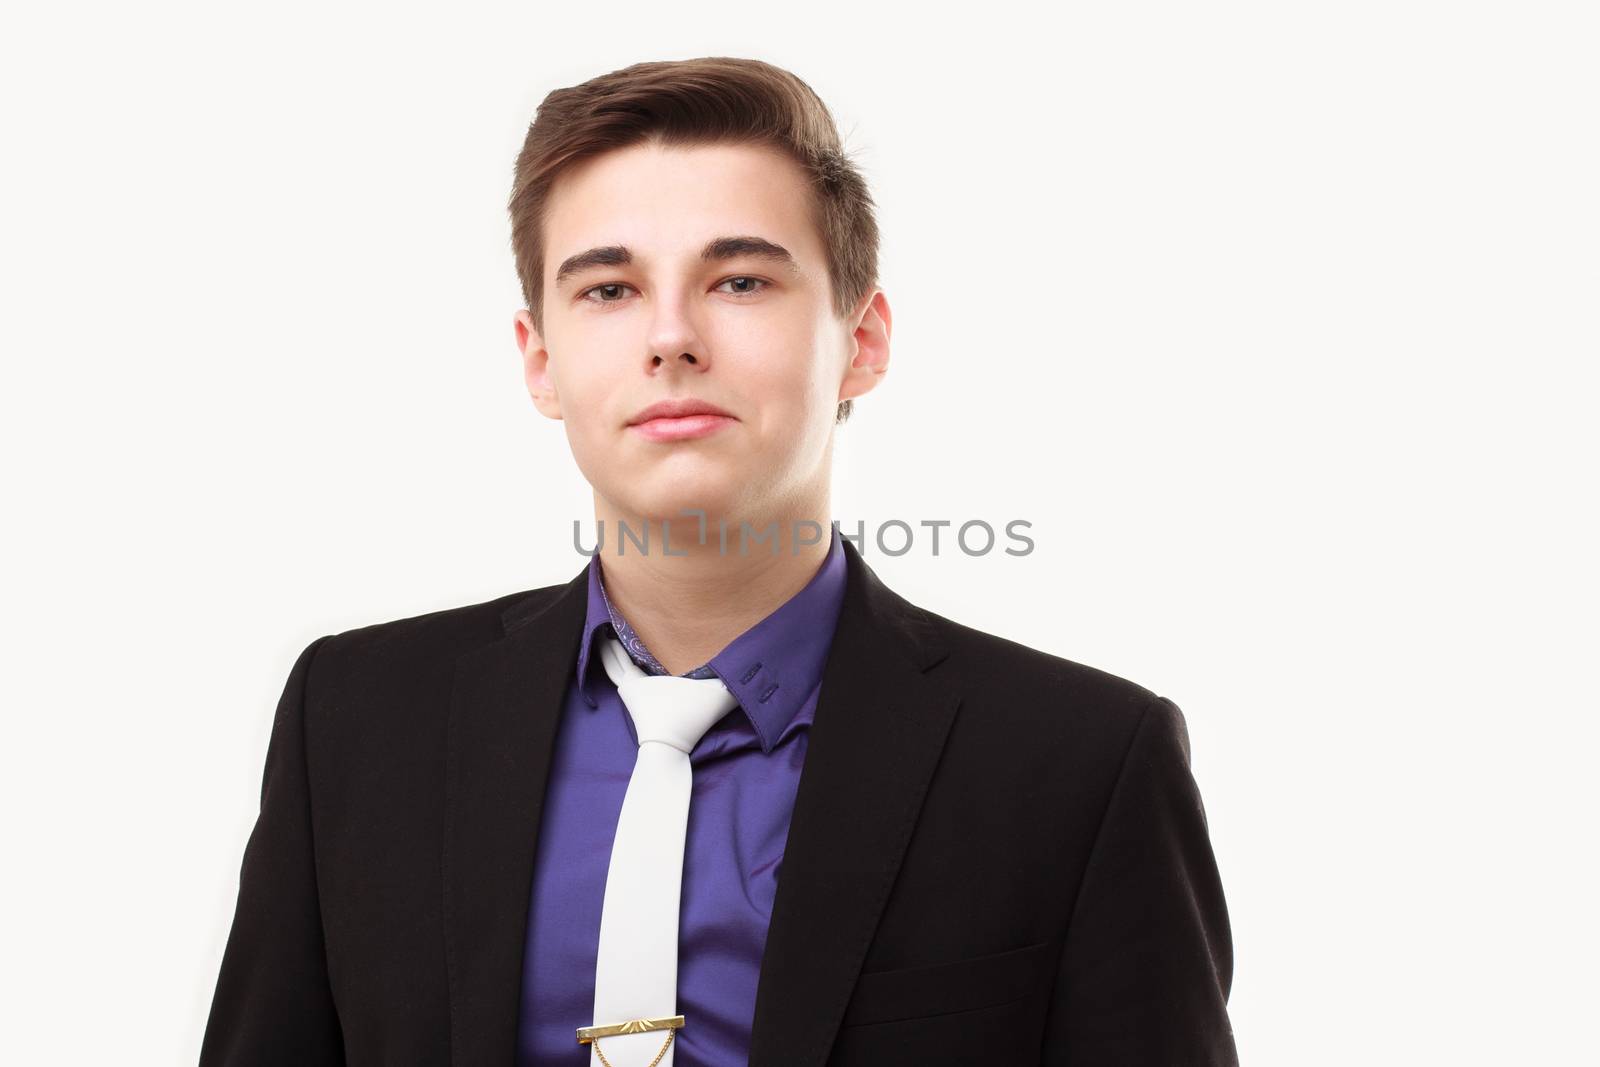 Close-up portrait of young business man wearing suit and tie isolated on white